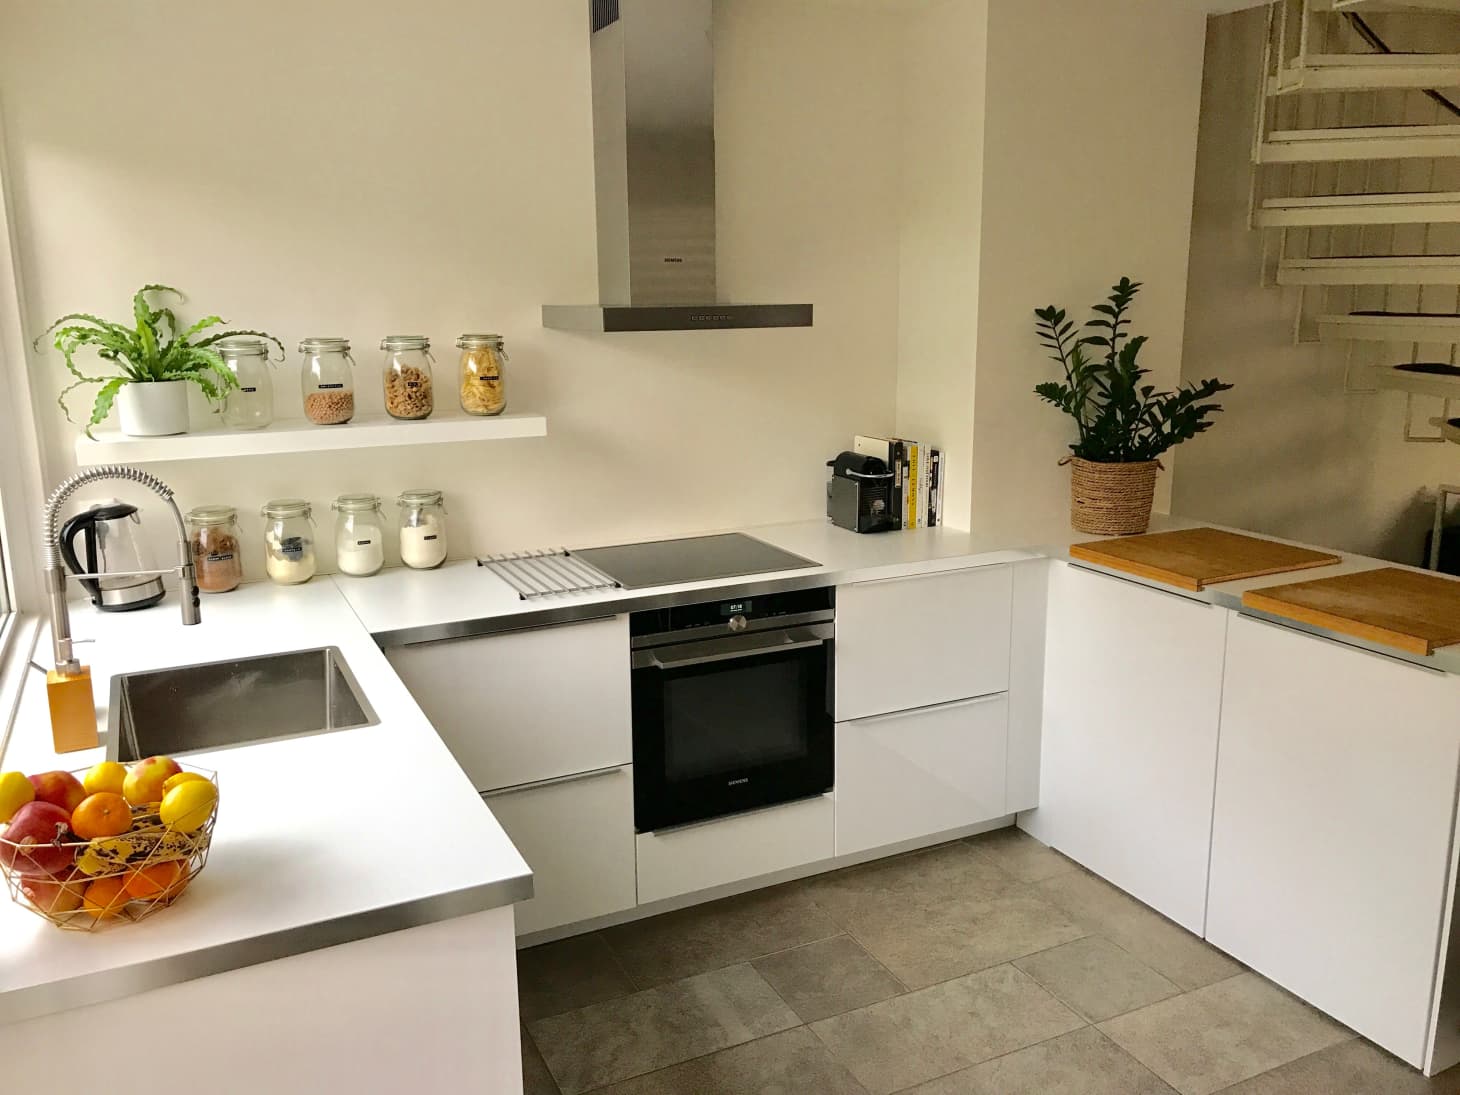 New How Much To Replace Kitchen Cabinets Ikea for Simple Design